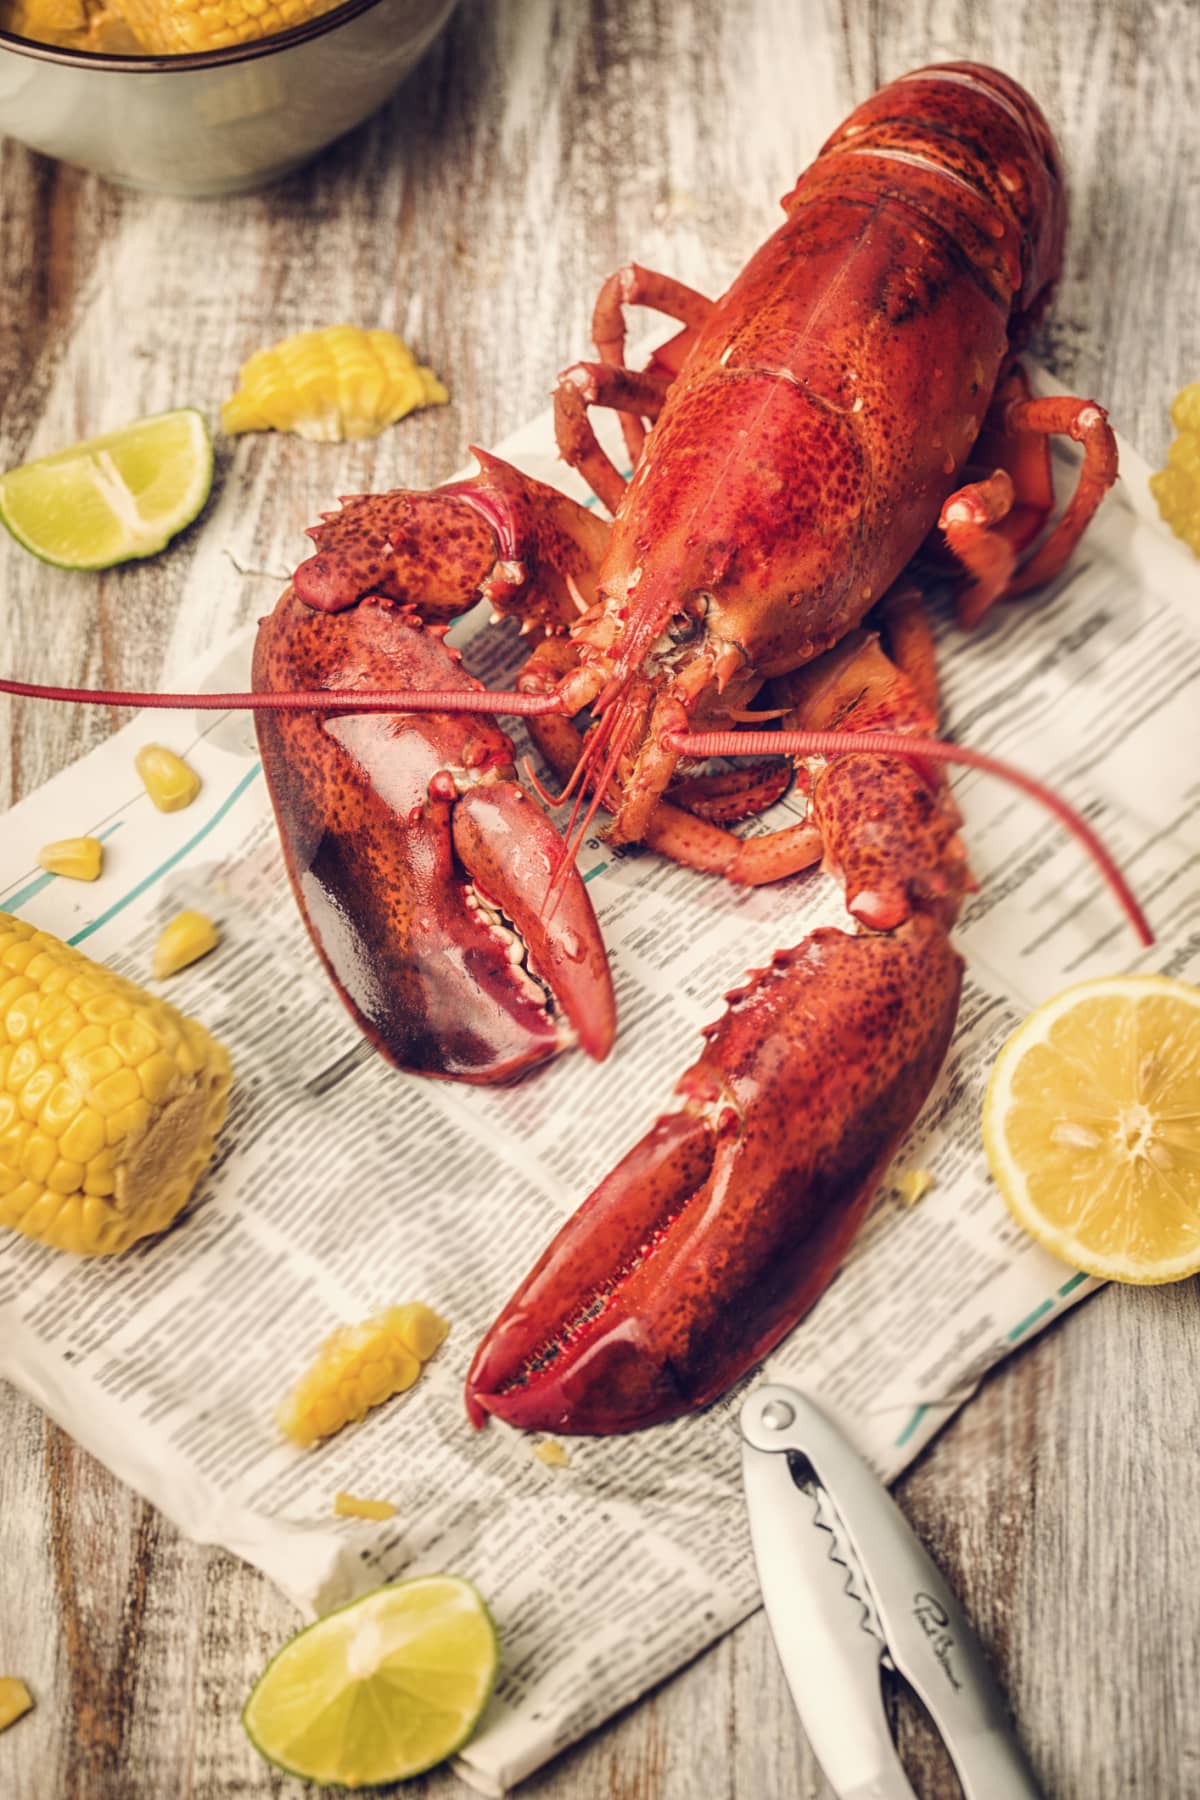 Delicious lobster served with sweetcorn, lemon and dipping sauce. A lobster can be cooked and boiled in a pot with salted water. It can also be prepared by steaming or on barbecue grill.